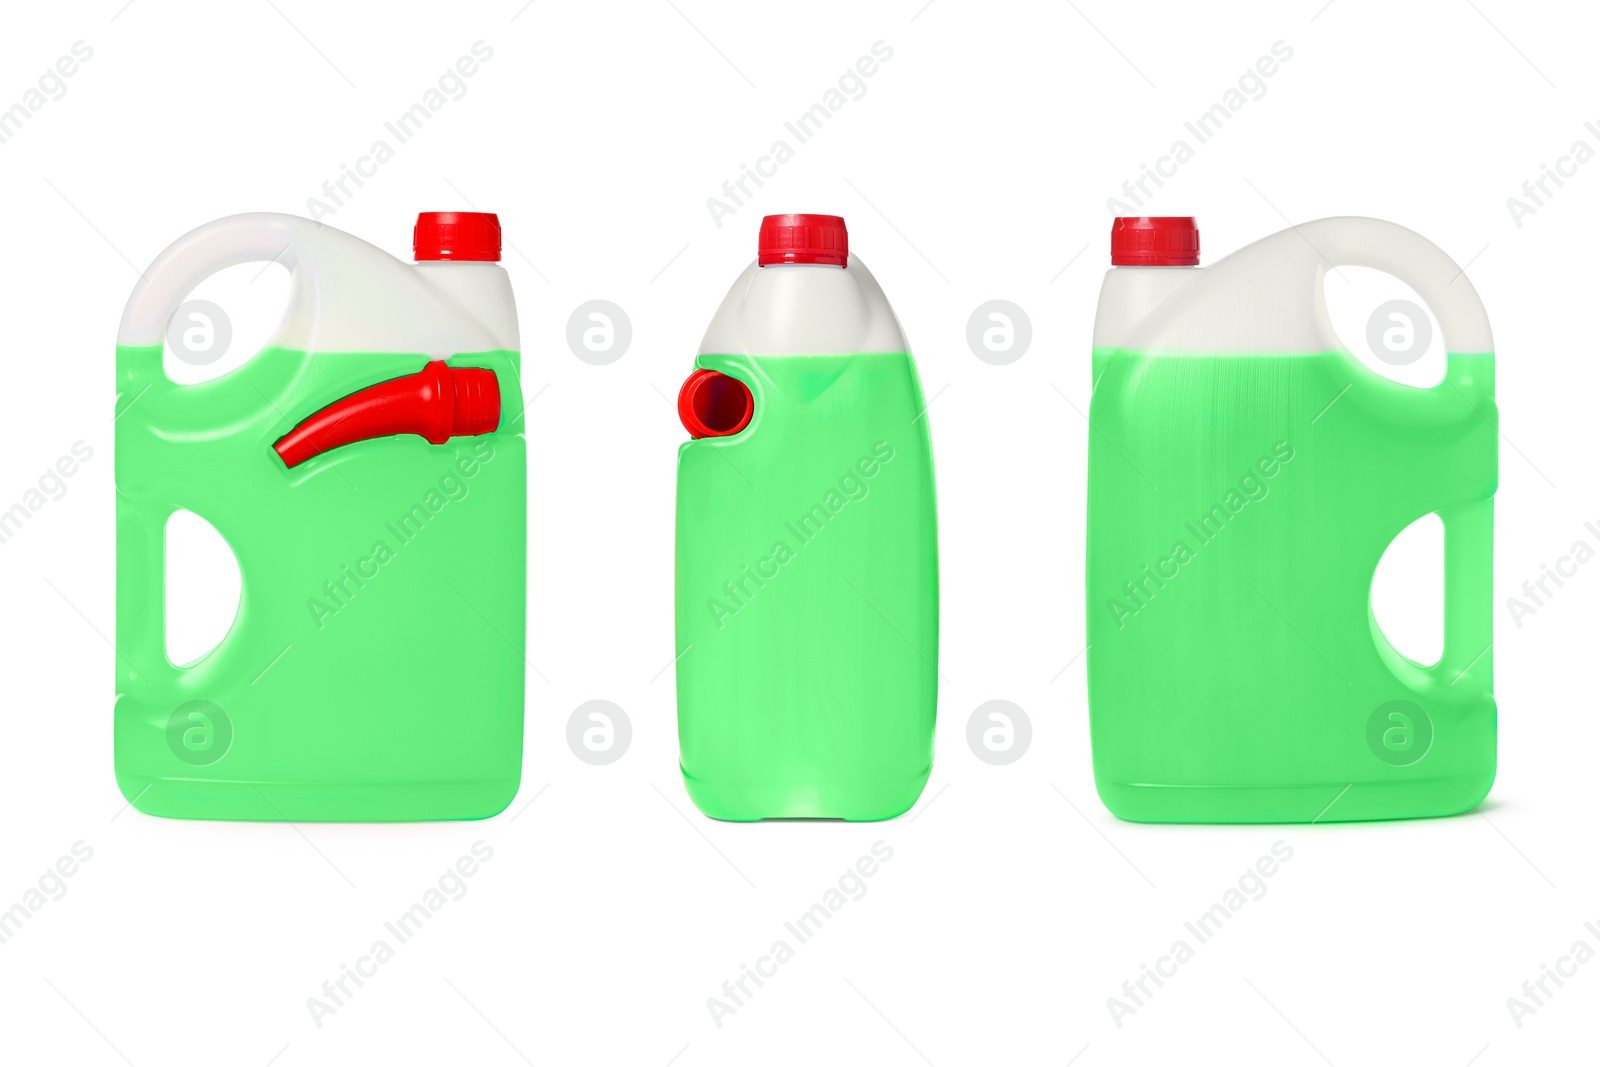 Image of Plastic canister with green liquid on white background, different sides